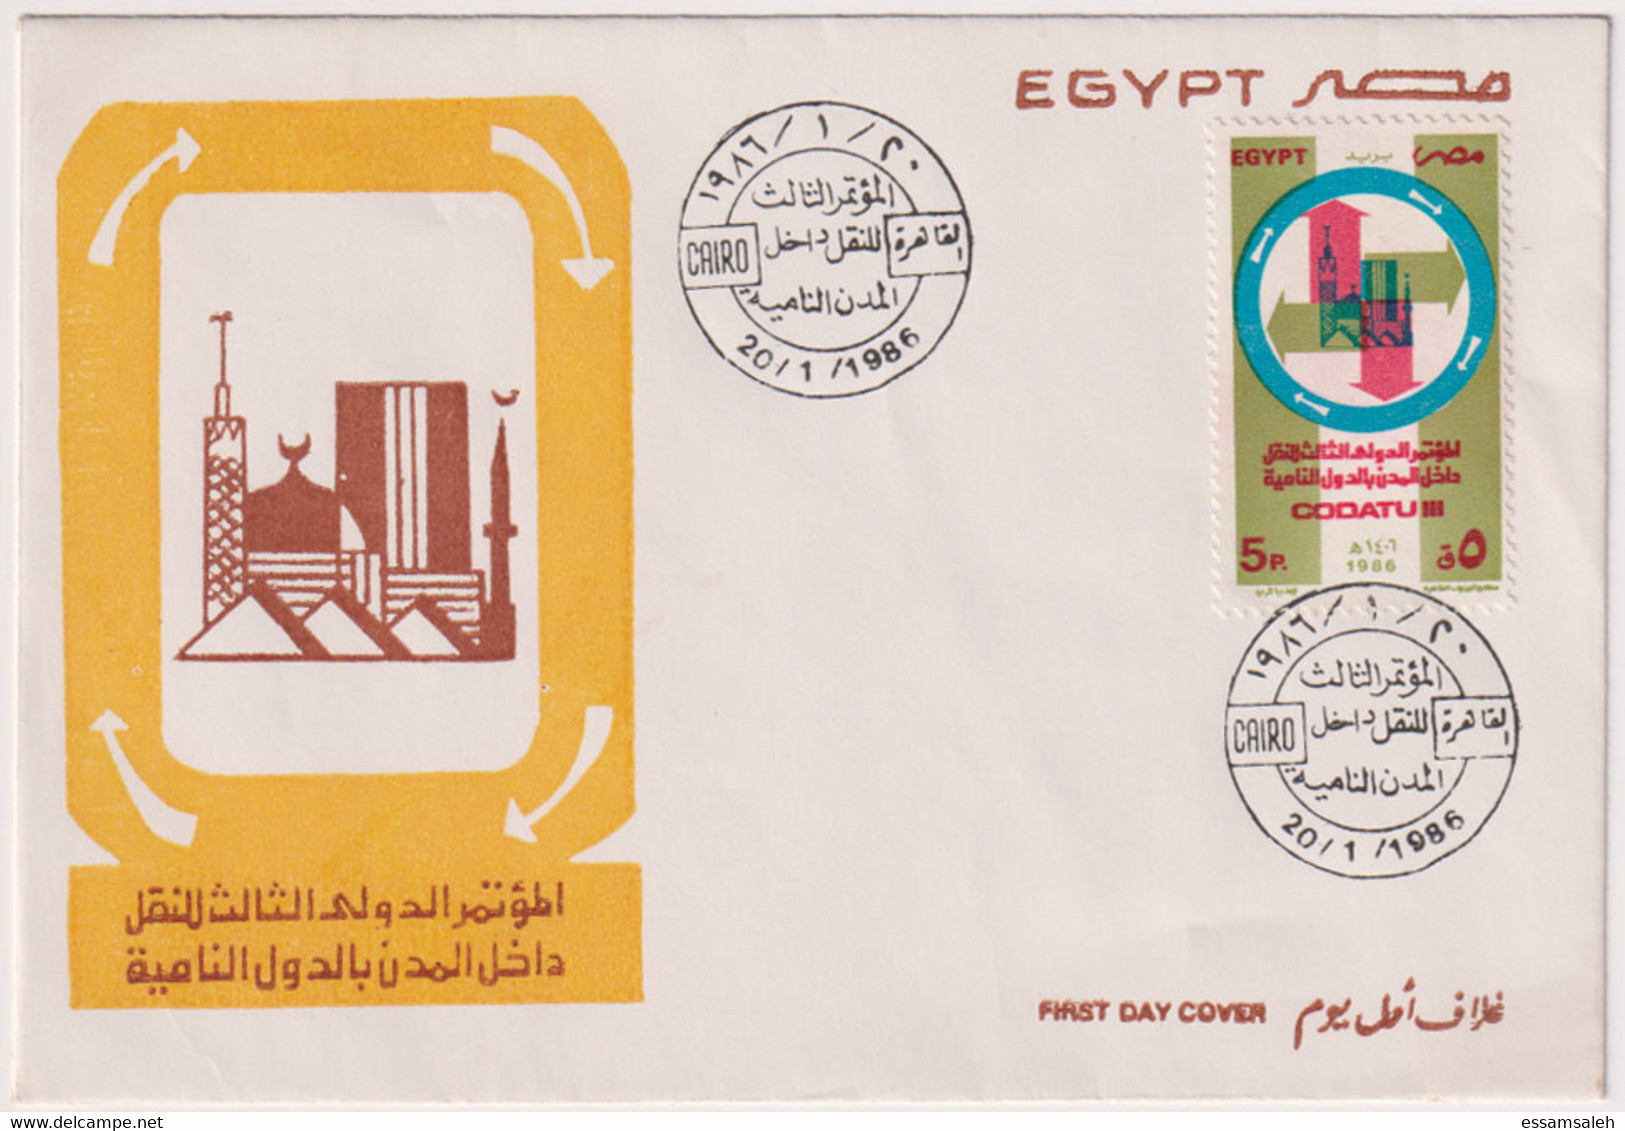 EGS30574 Egypt 1986 Illustrated FDC The 3th Conference On Transport Within Developing Cities - Storia Postale